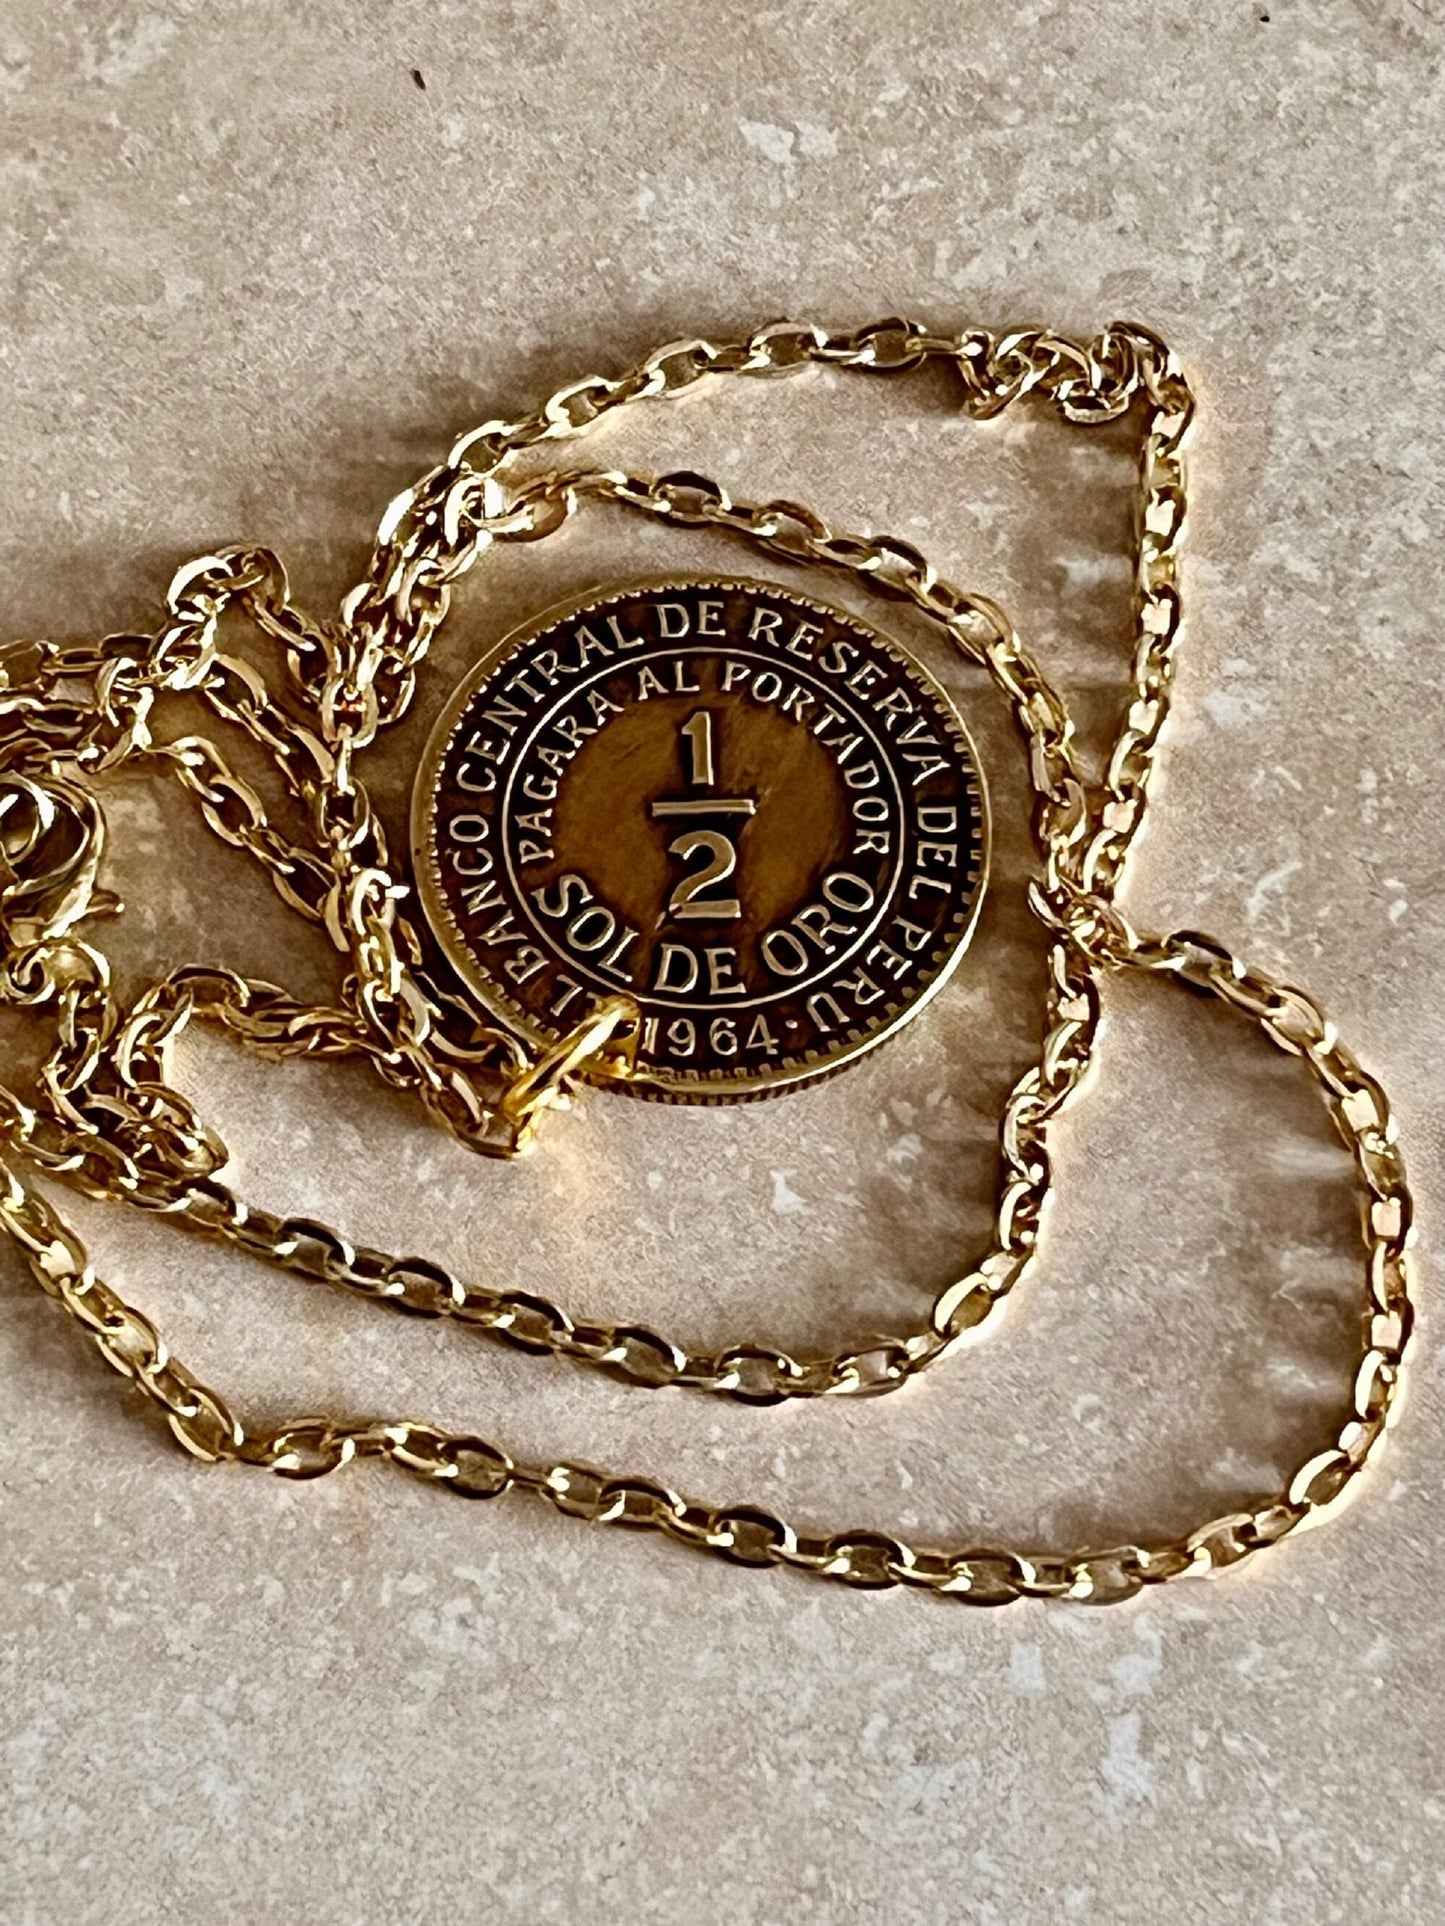 Peru Coin Pendant Peruvian Half Sol DE Oro Personal Necklace Old Vintage Handmade Jewelry Gift Friend Charm For Him Her World Coin Collector